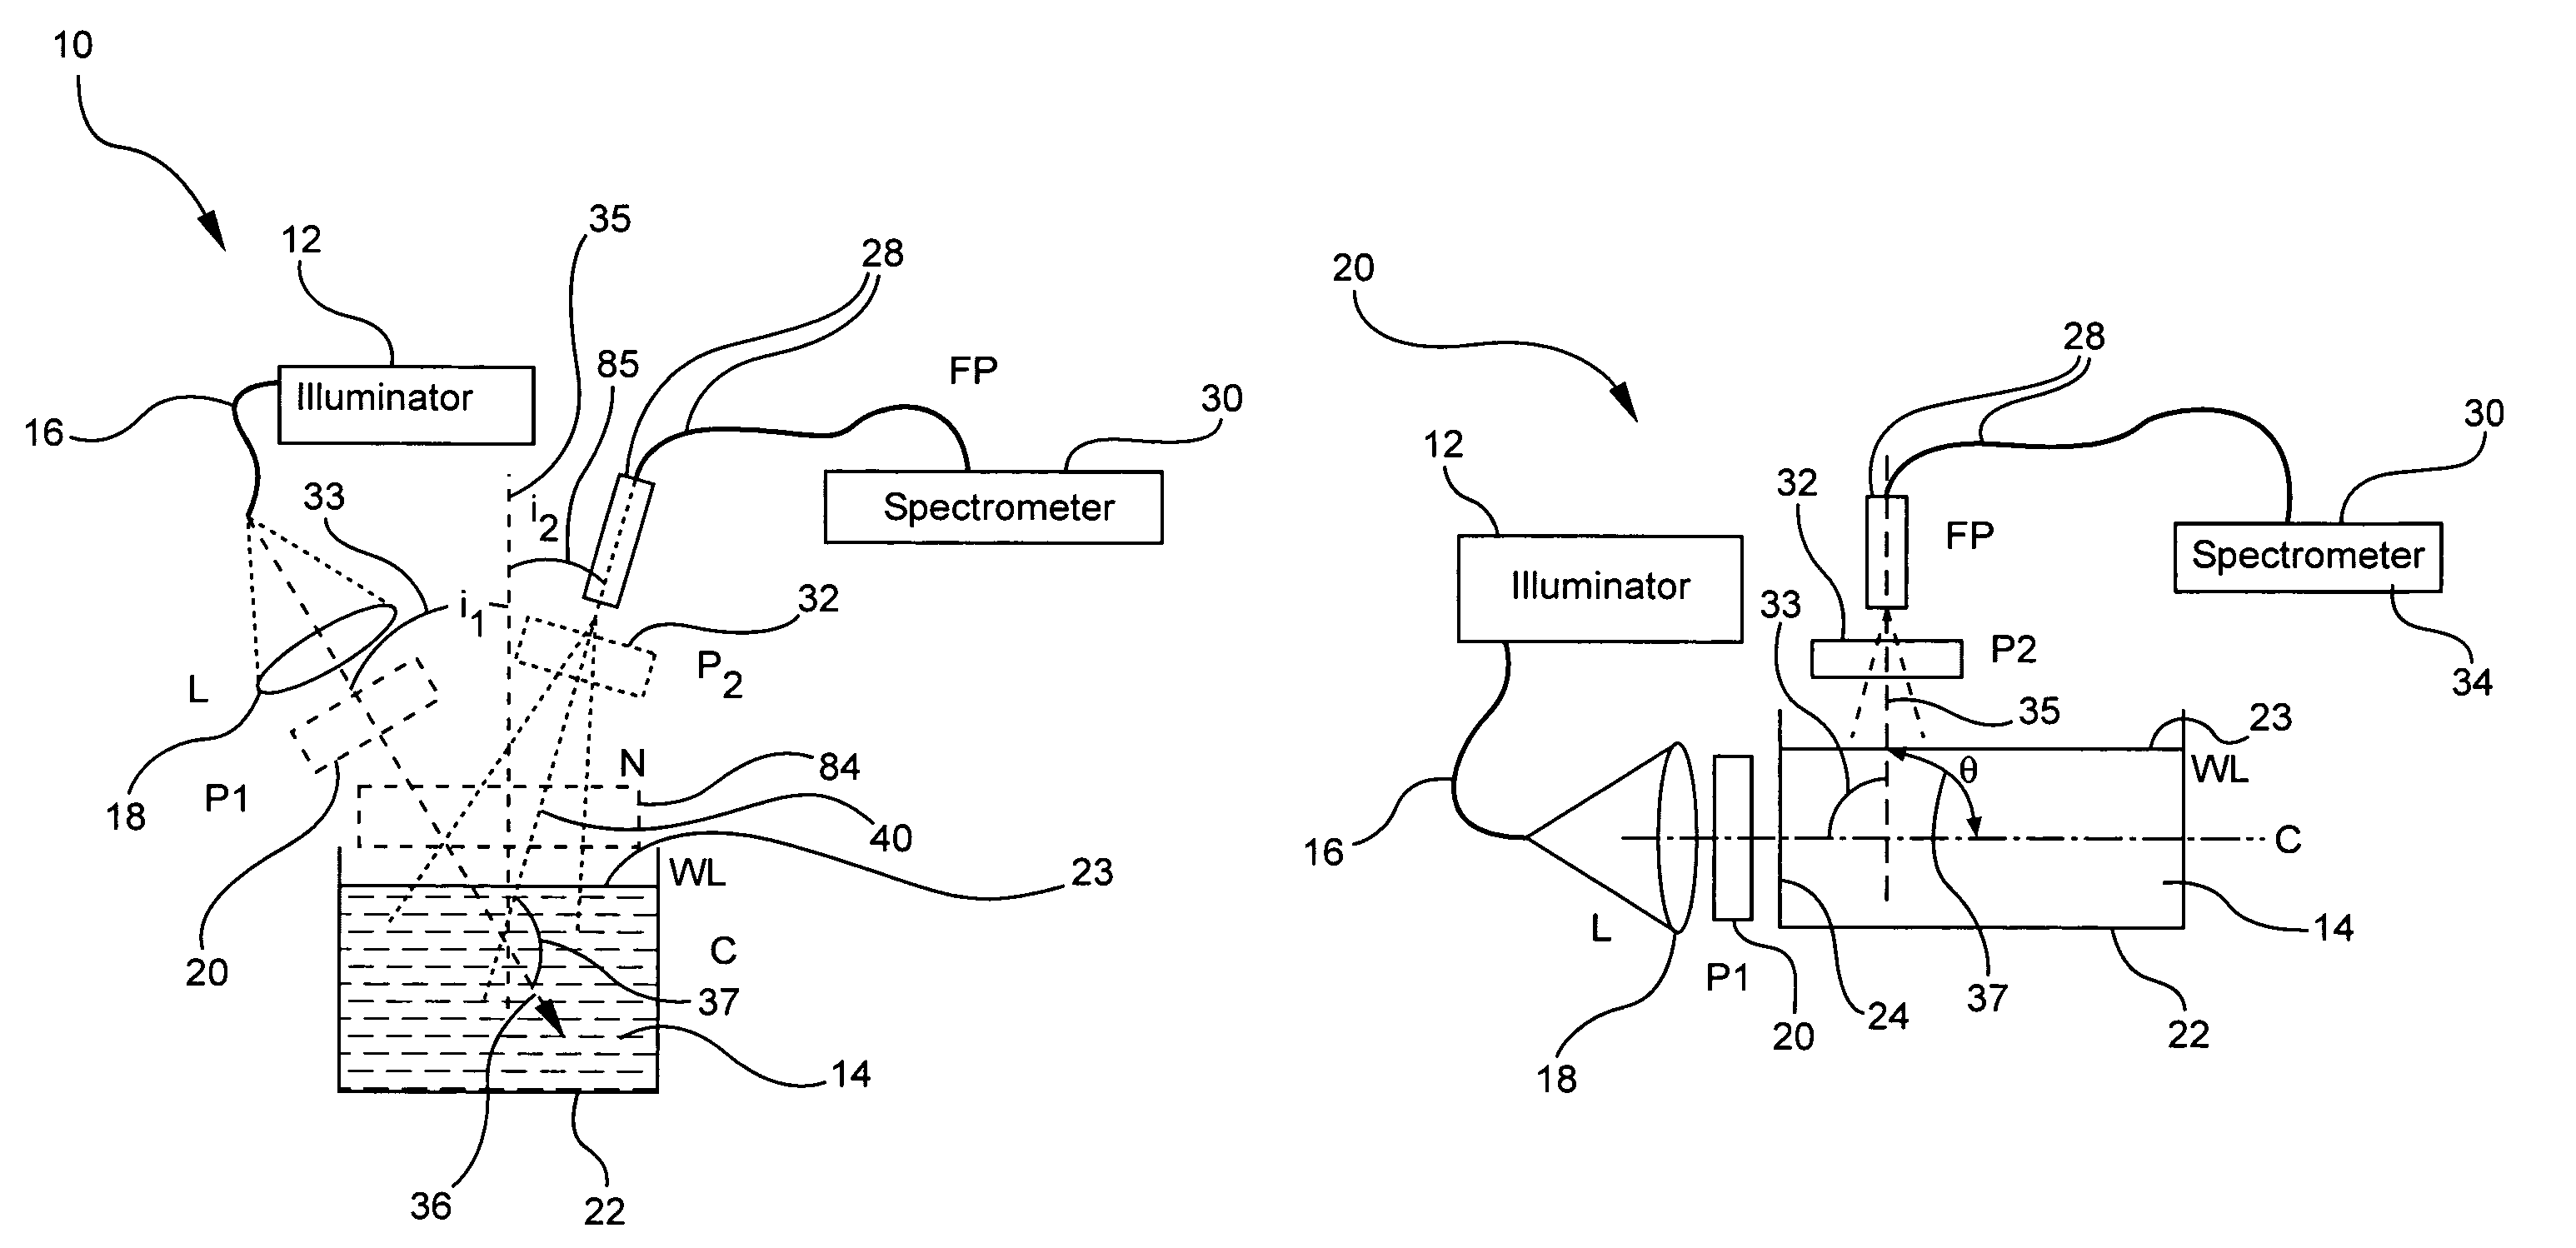 Method and apparatus for the separation of fluoroscence and elastic scattering produced by broadband illumination using polarization discrimination techniques